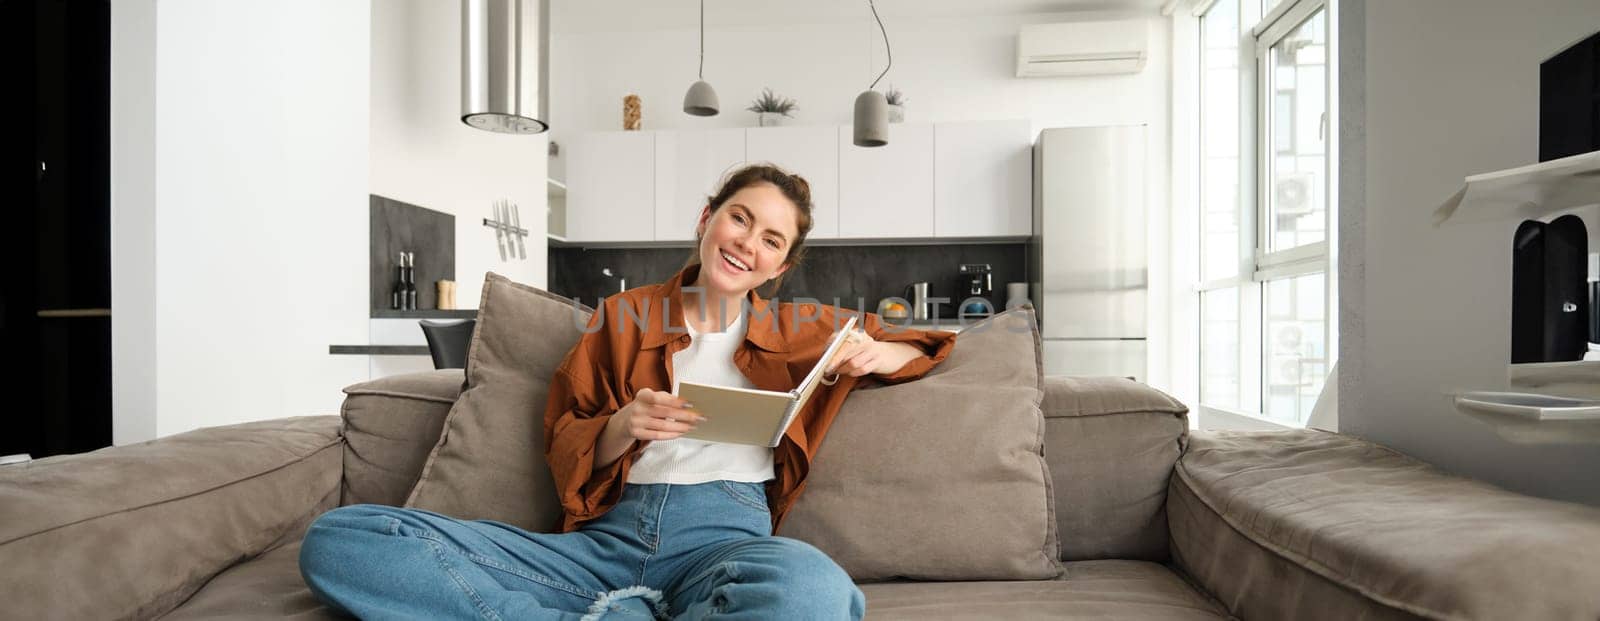 Young woman sits at home on sofa, reading her notes, holding notebook, studying for exam, student revising in her living room.